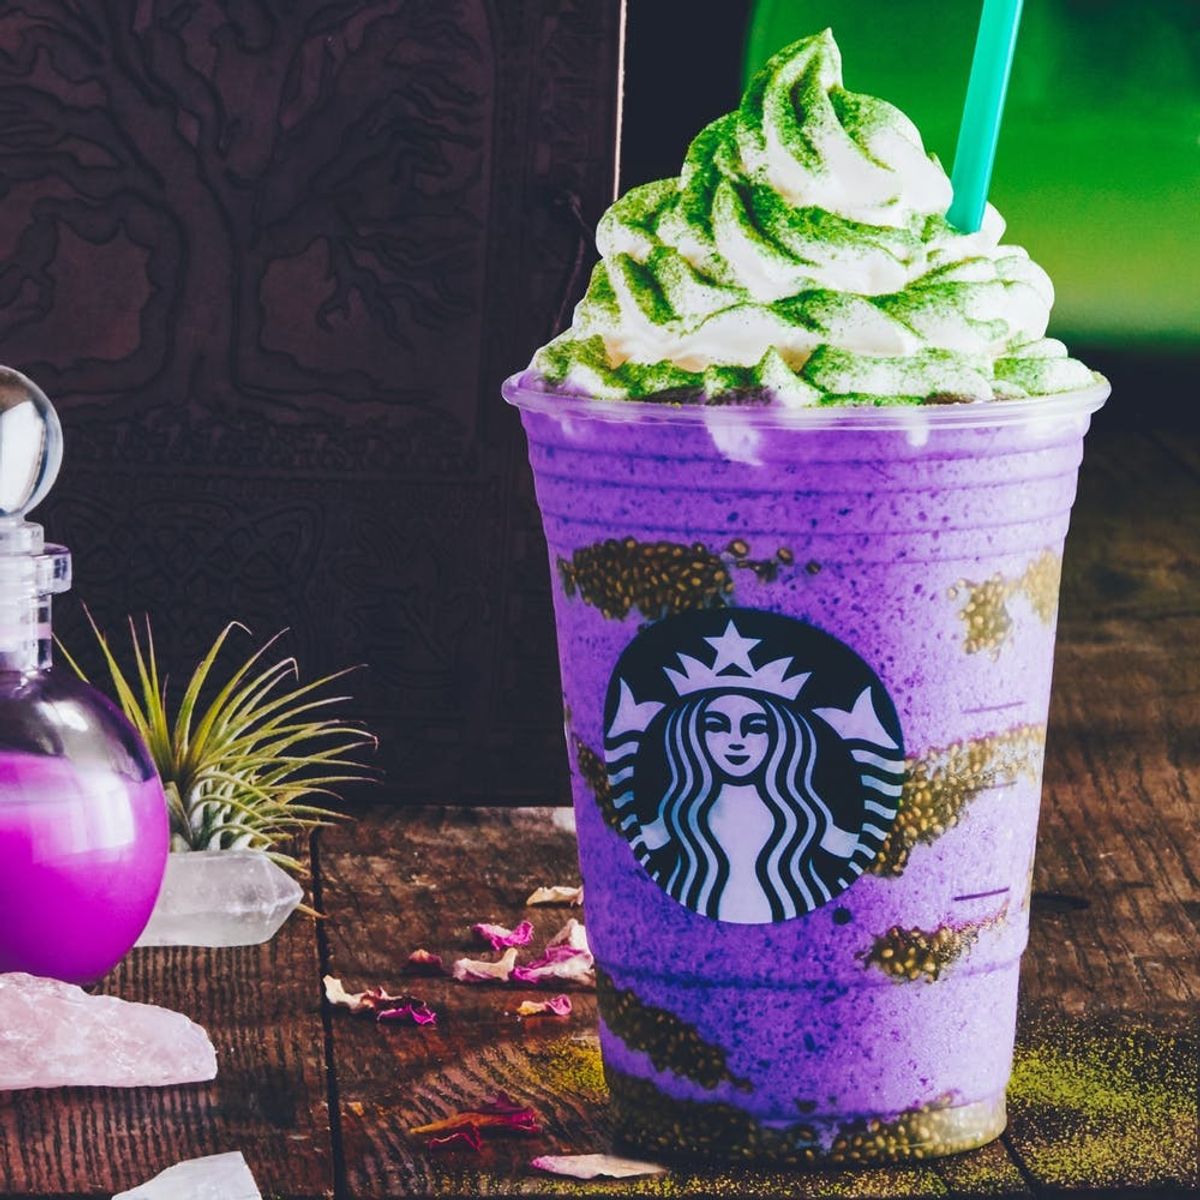 Do You Dare Drink the New Starbucks Witch’s Brew Frappuccino This Halloween?